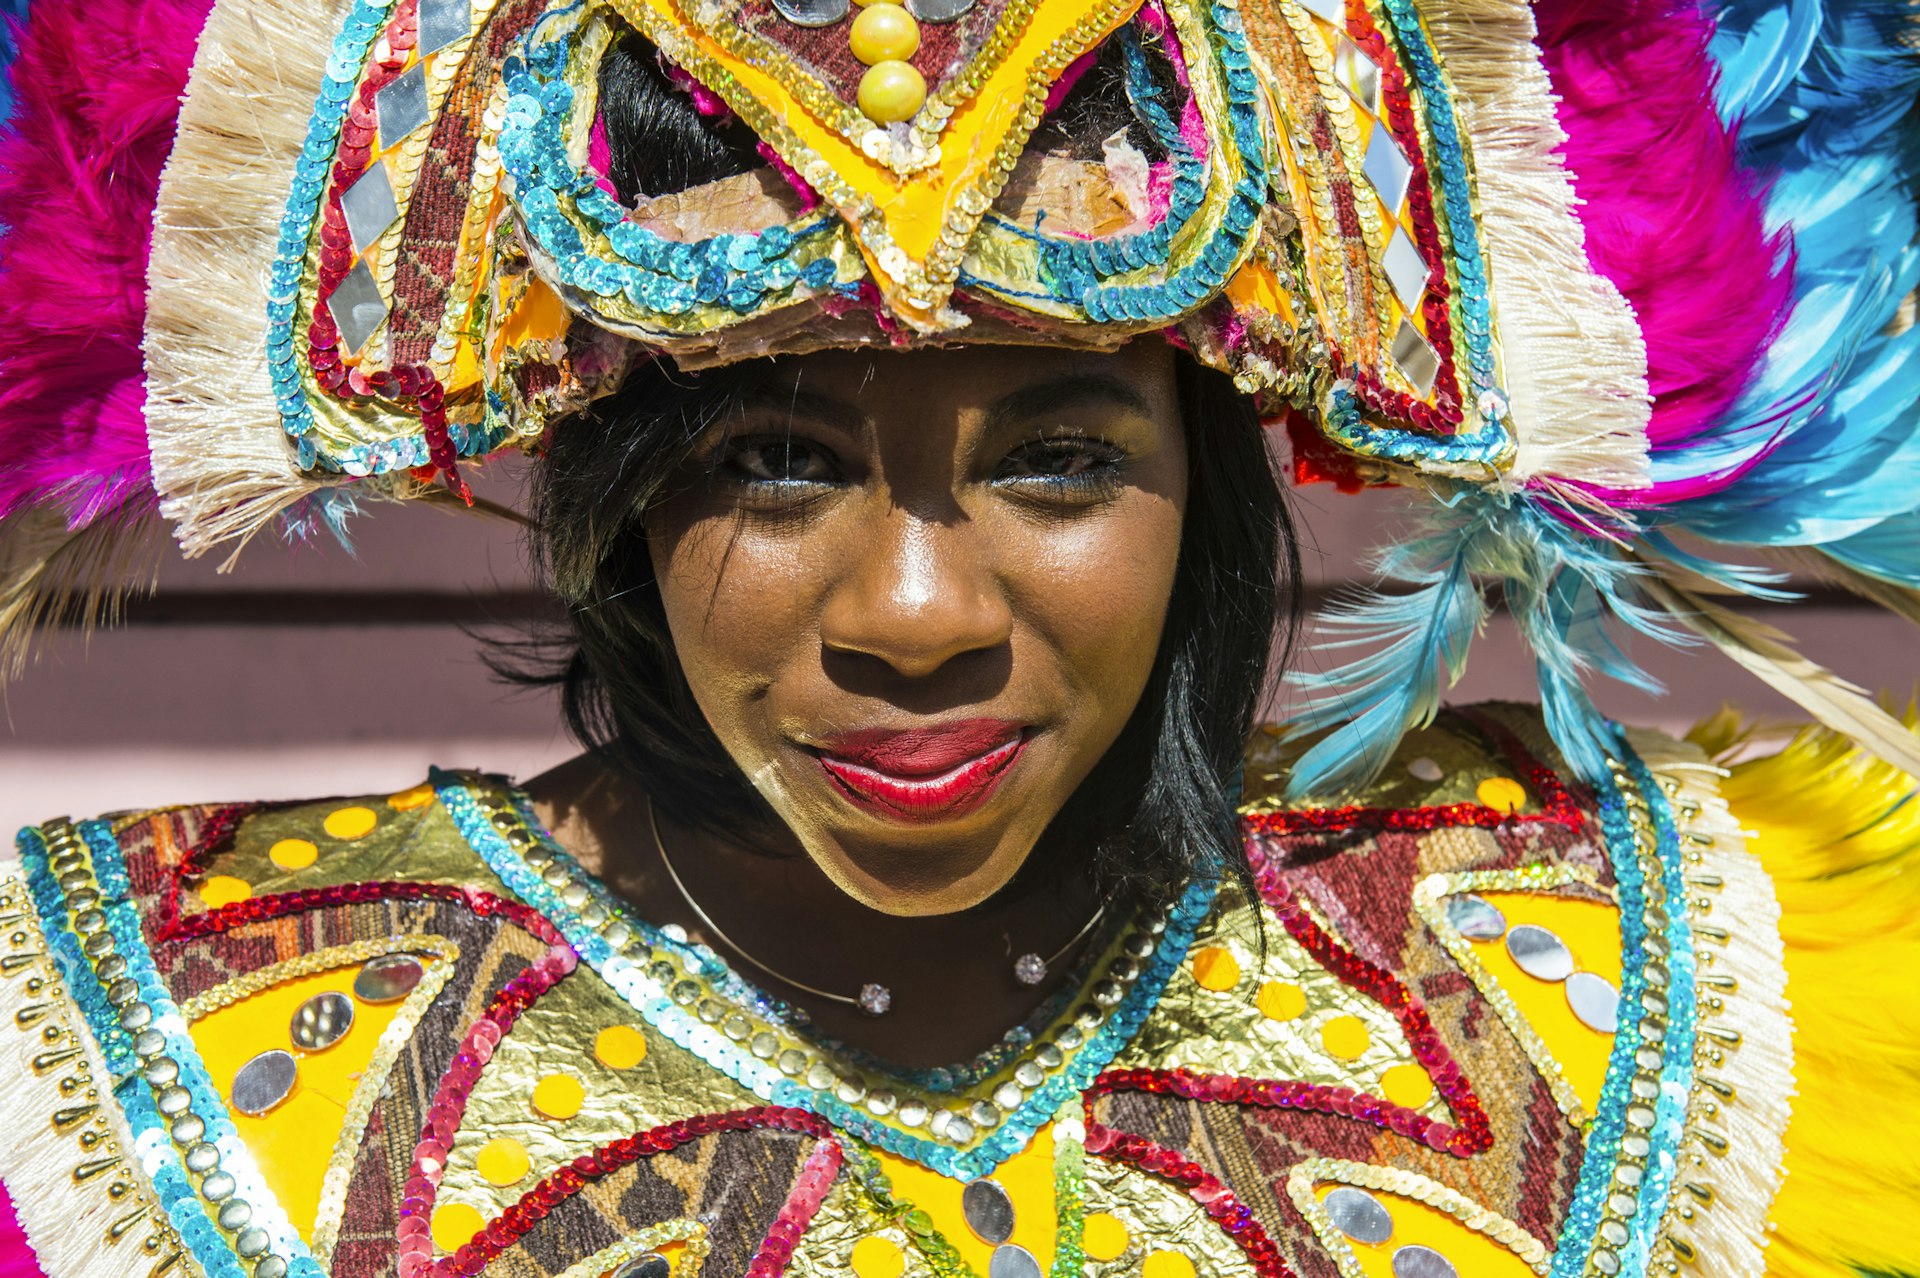 A woman dressed up in bright colours for the junkanoo festival in the Bahamas